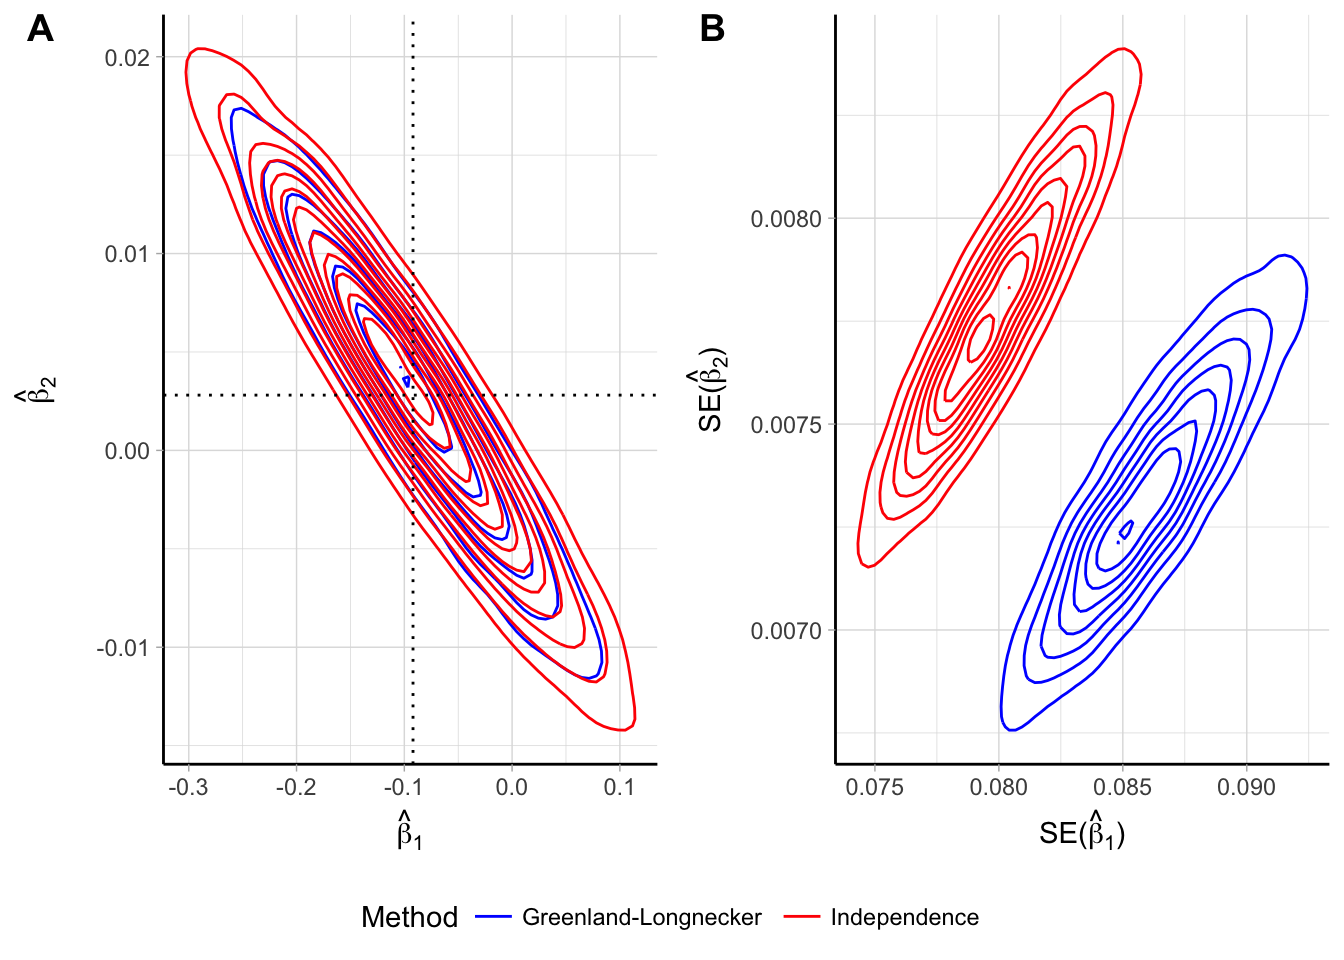 Empirical bivariate distribution of the beta coefficients (panel A) and their standard errors (panel B) for a quadratic trend assuming independence of the log $\widehat{\mathrm{RR}}$  and reconstructing the covariances using the Greenland and Longnecker’s method. Results are based on simulations with 5000 replications and a true quadratic trend $\beta_{1}$  = -0.092, $\beta_{2}$  = 0.003.